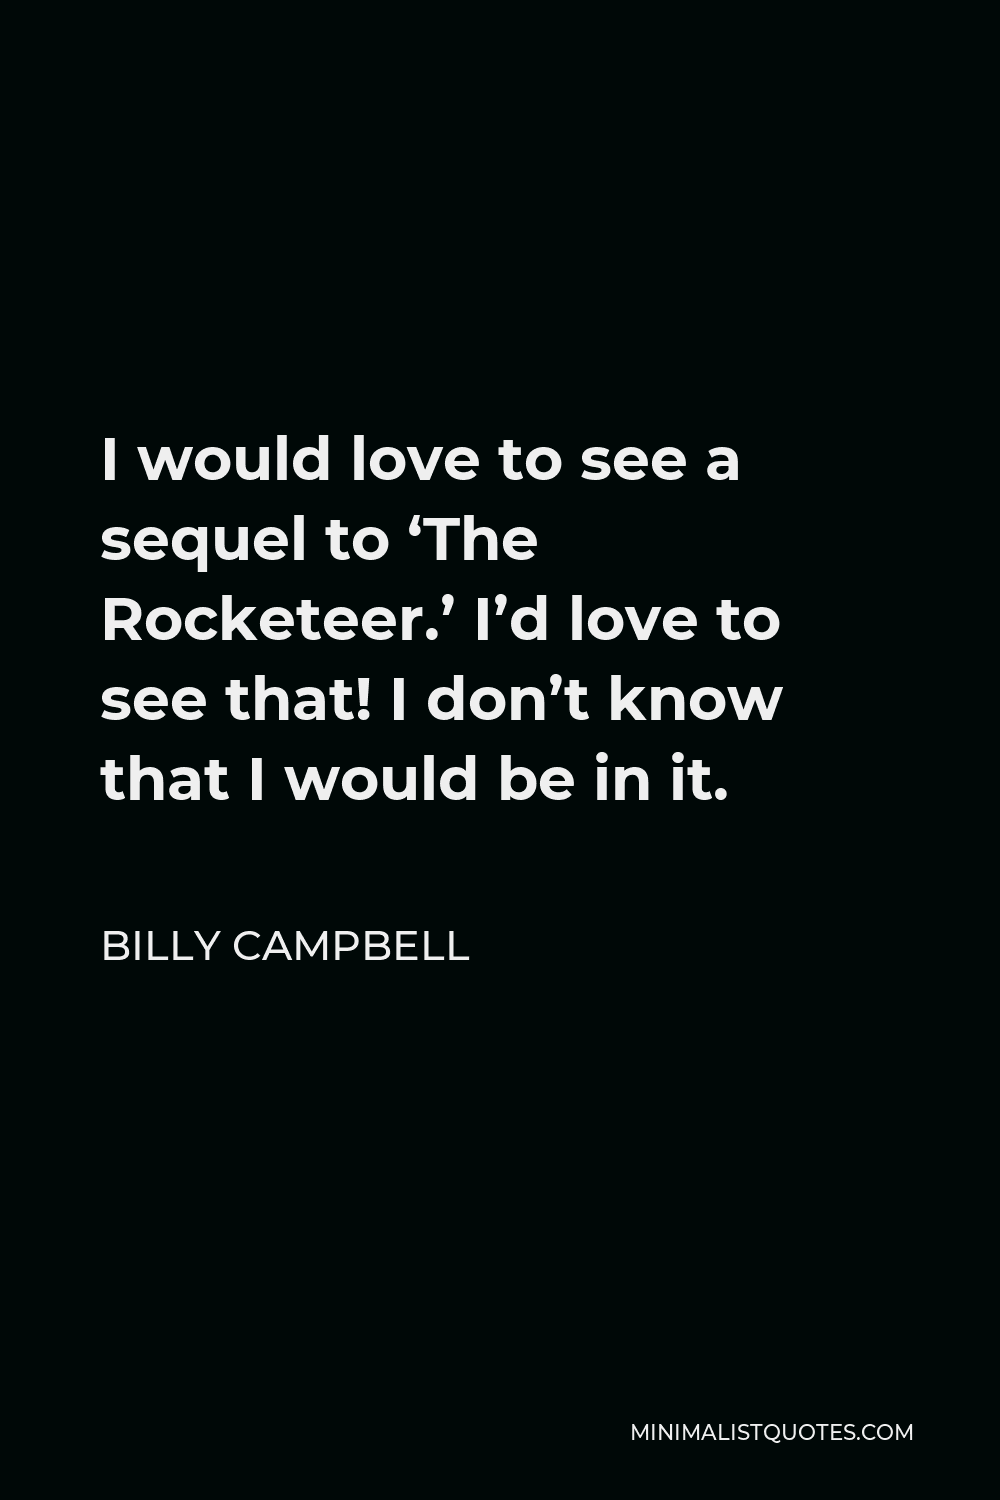 Billy Campbell Quote - I would love to see a sequel to ‘The Rocketeer.’ I’d love to see that! I don’t know that I would be in it.